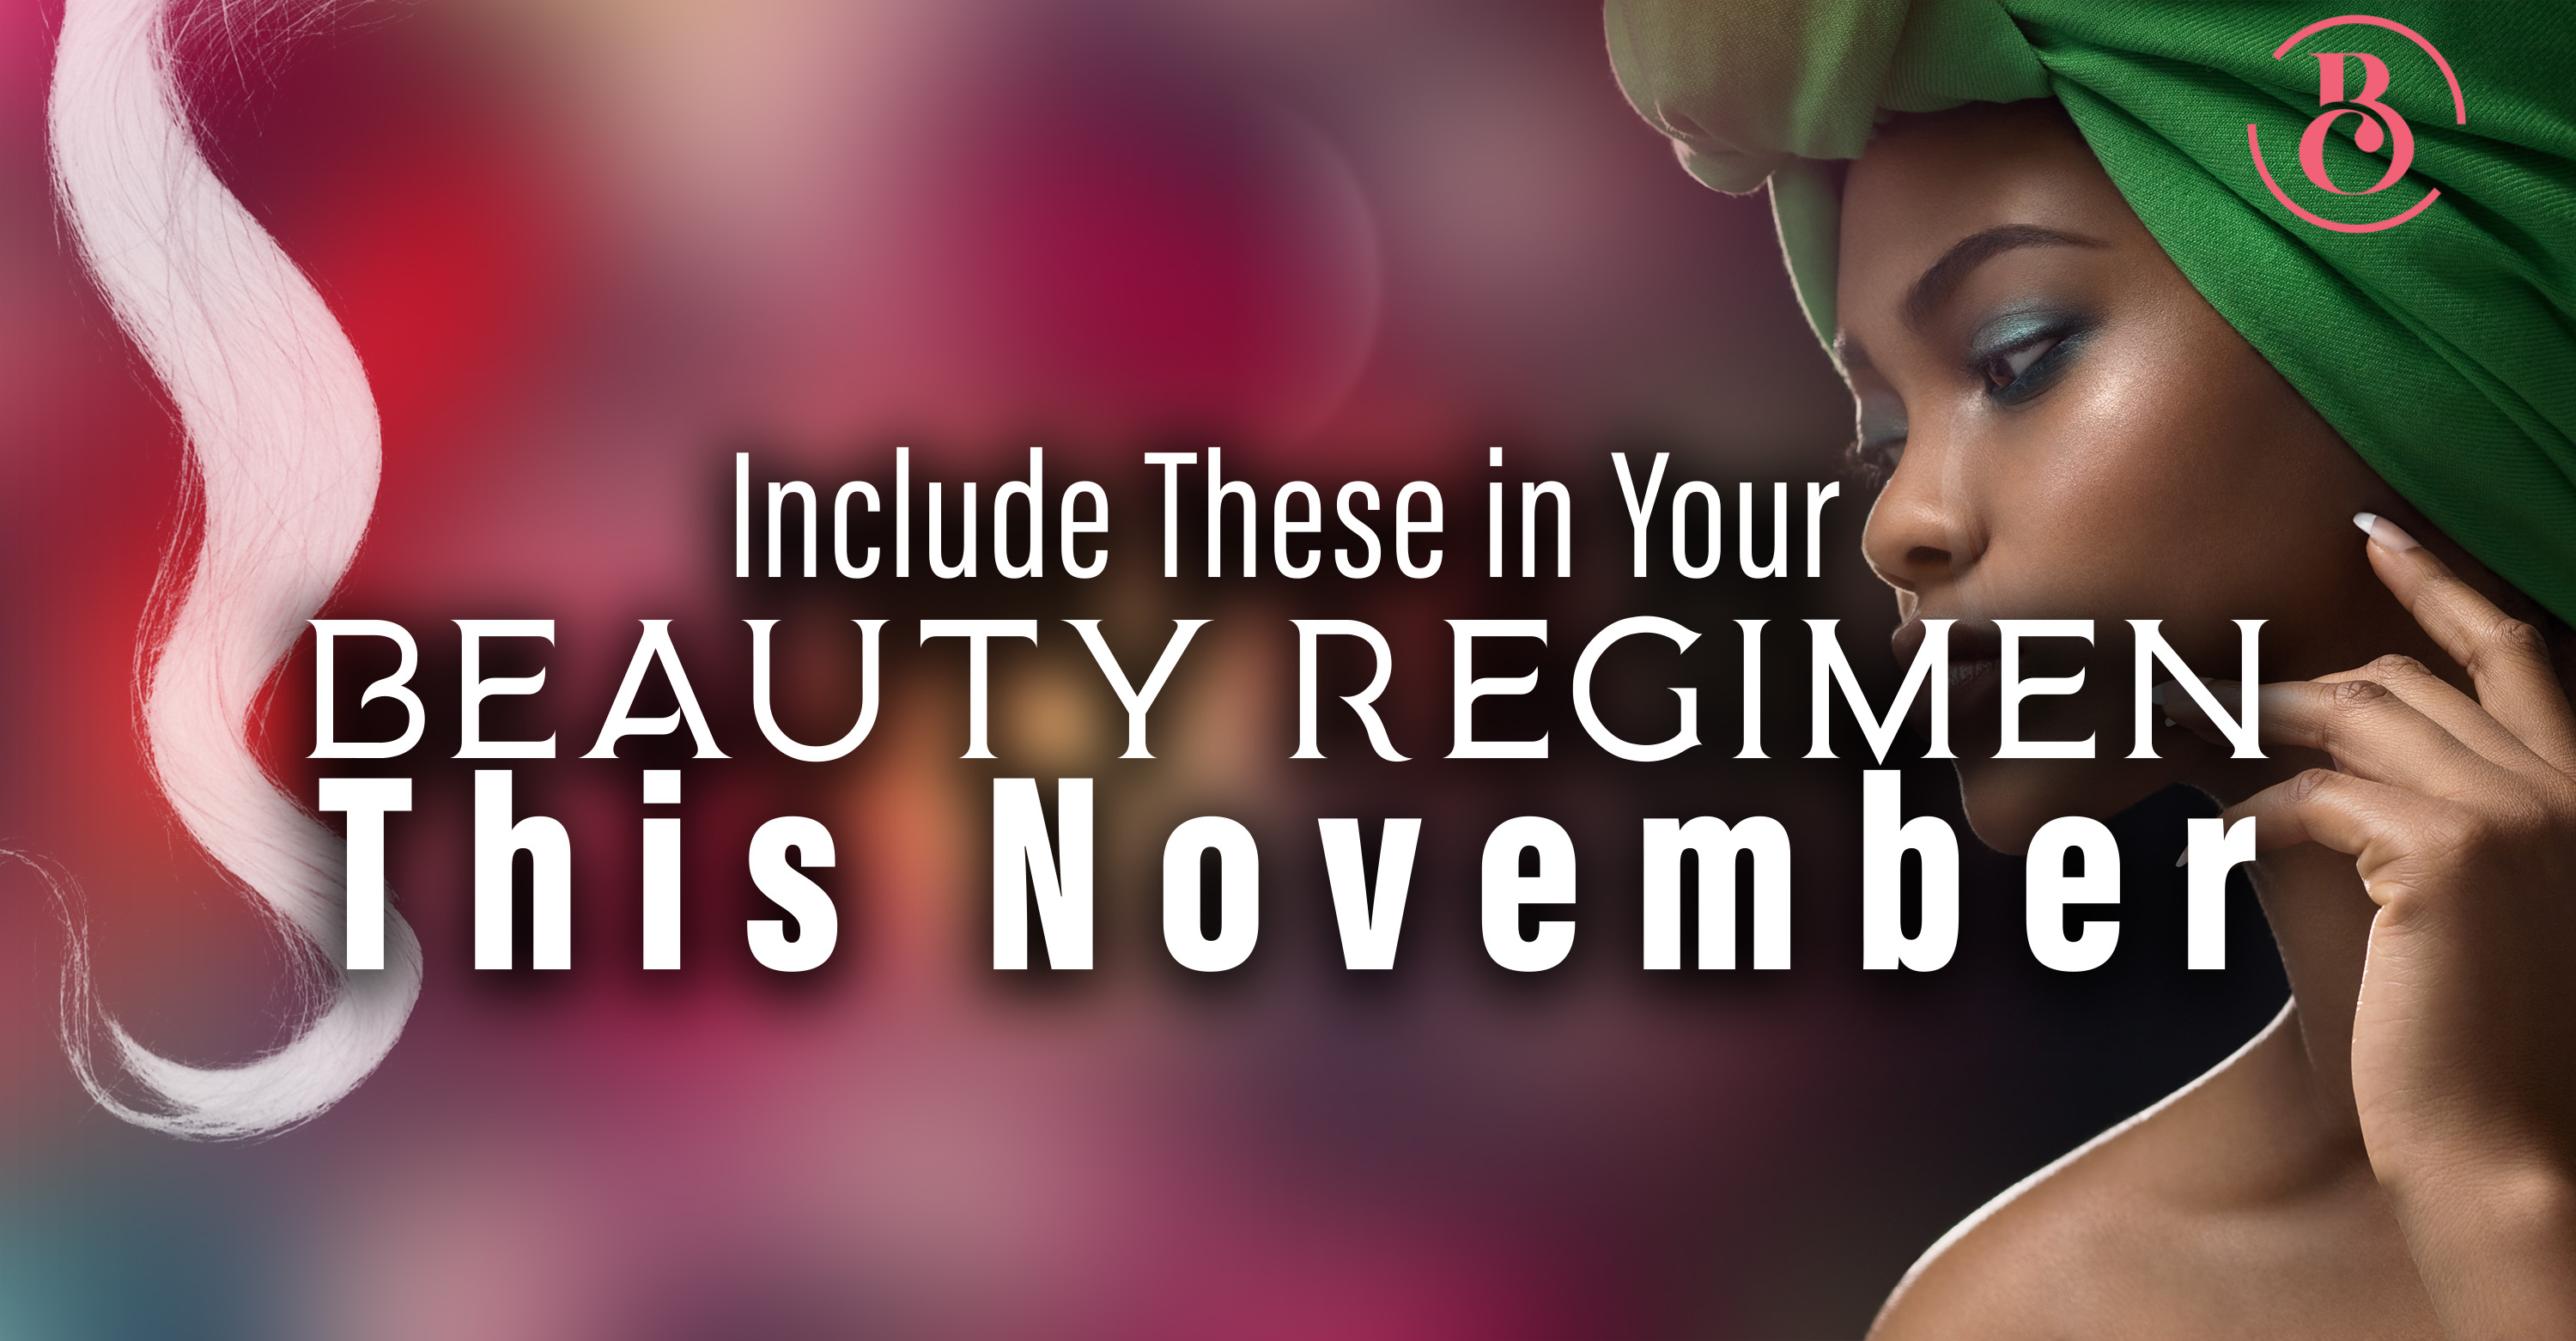 7 Things to Include in Your Beauty Regimen This November